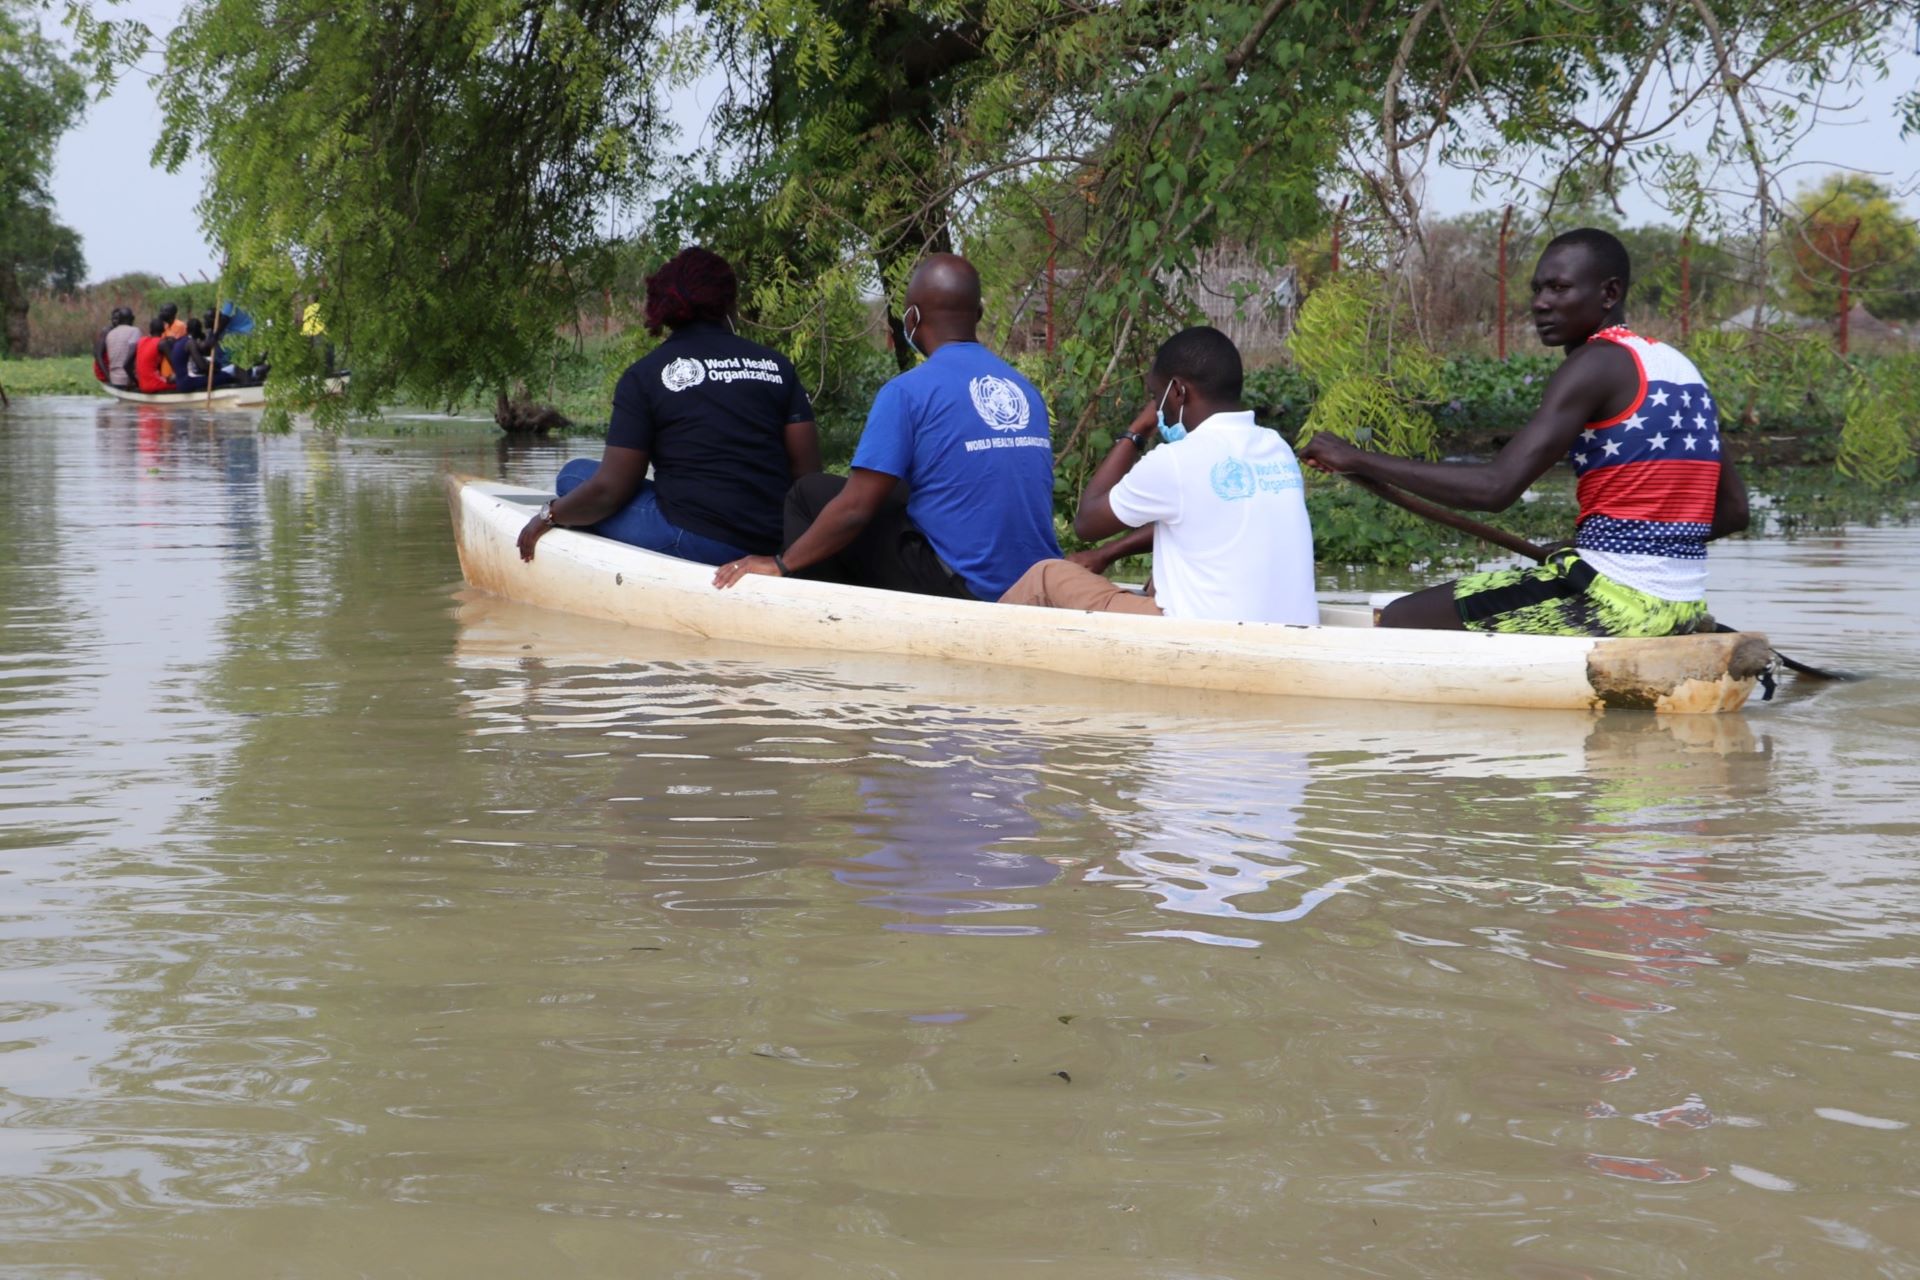 Four people in a canoe, three of whom are wearing WHO T-shirts, travelling on flooded ground.